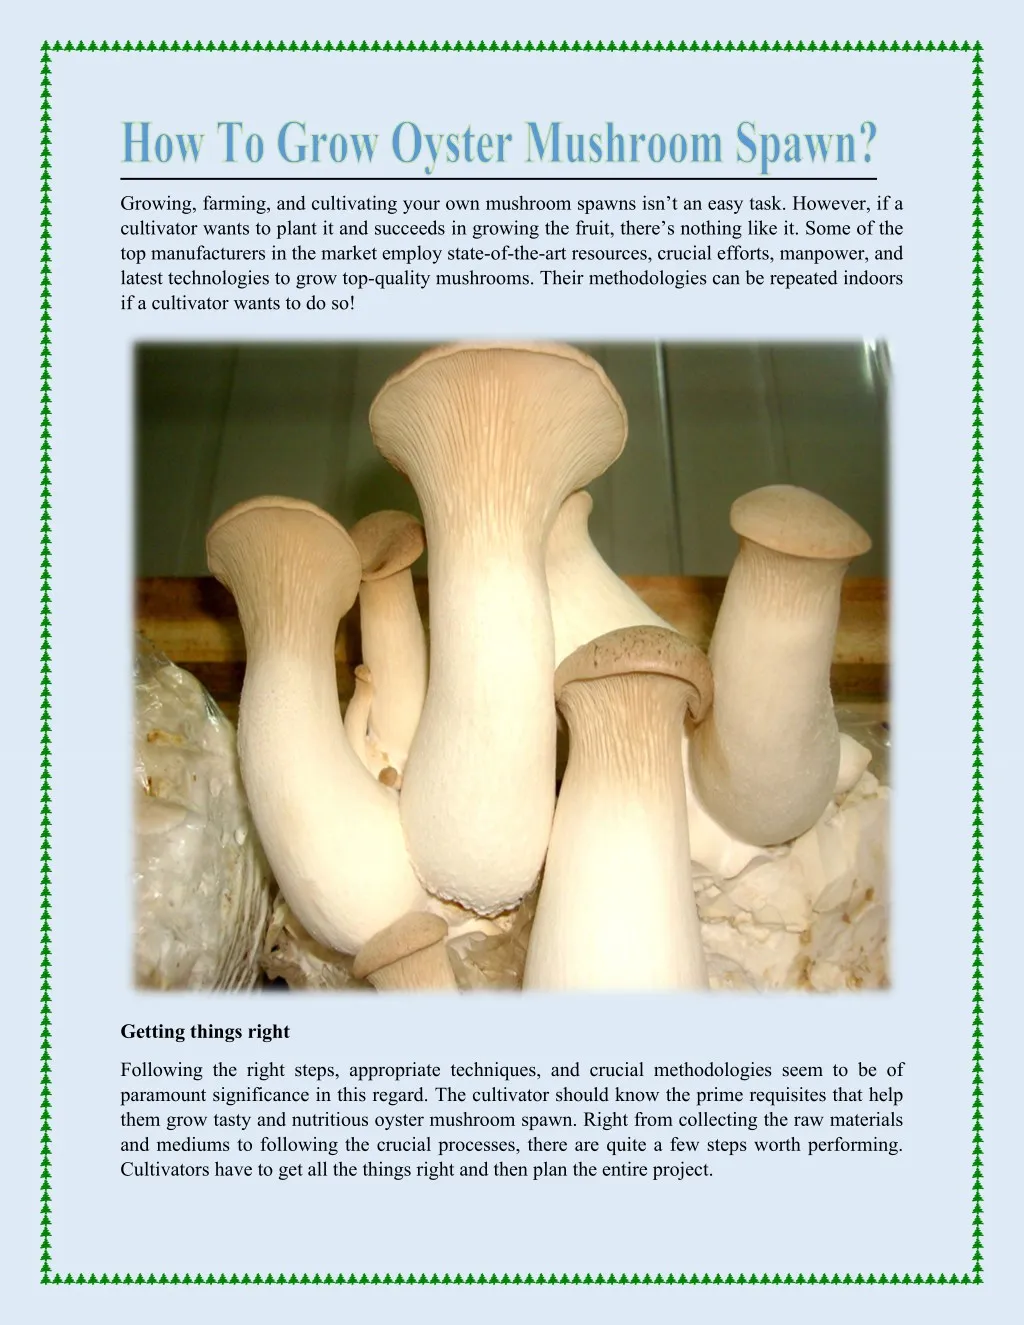 growing farming and cultivating your own mushroom